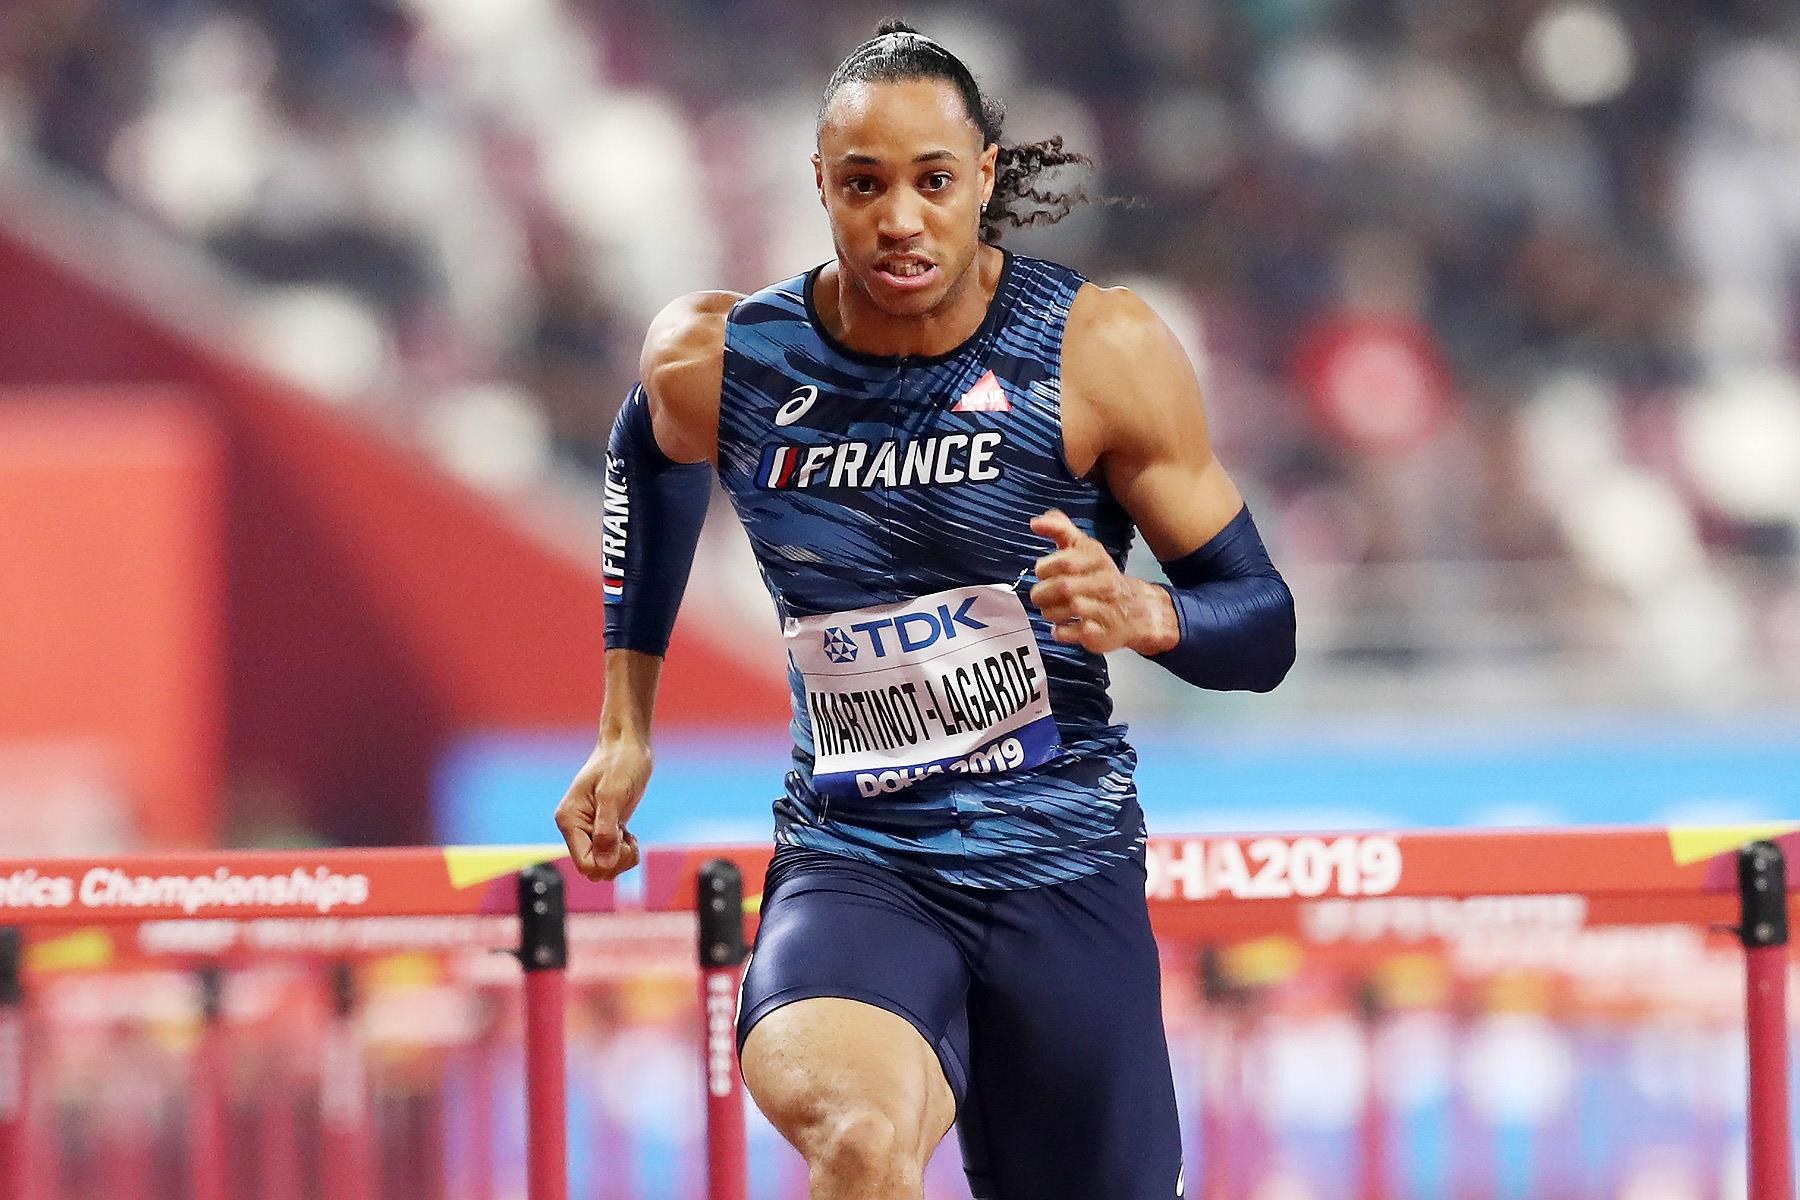 Pascal Martinot-Lagarde in the 110m hurdles at the IAAF World Athletics Championships Doha 2019 (Getty Images)